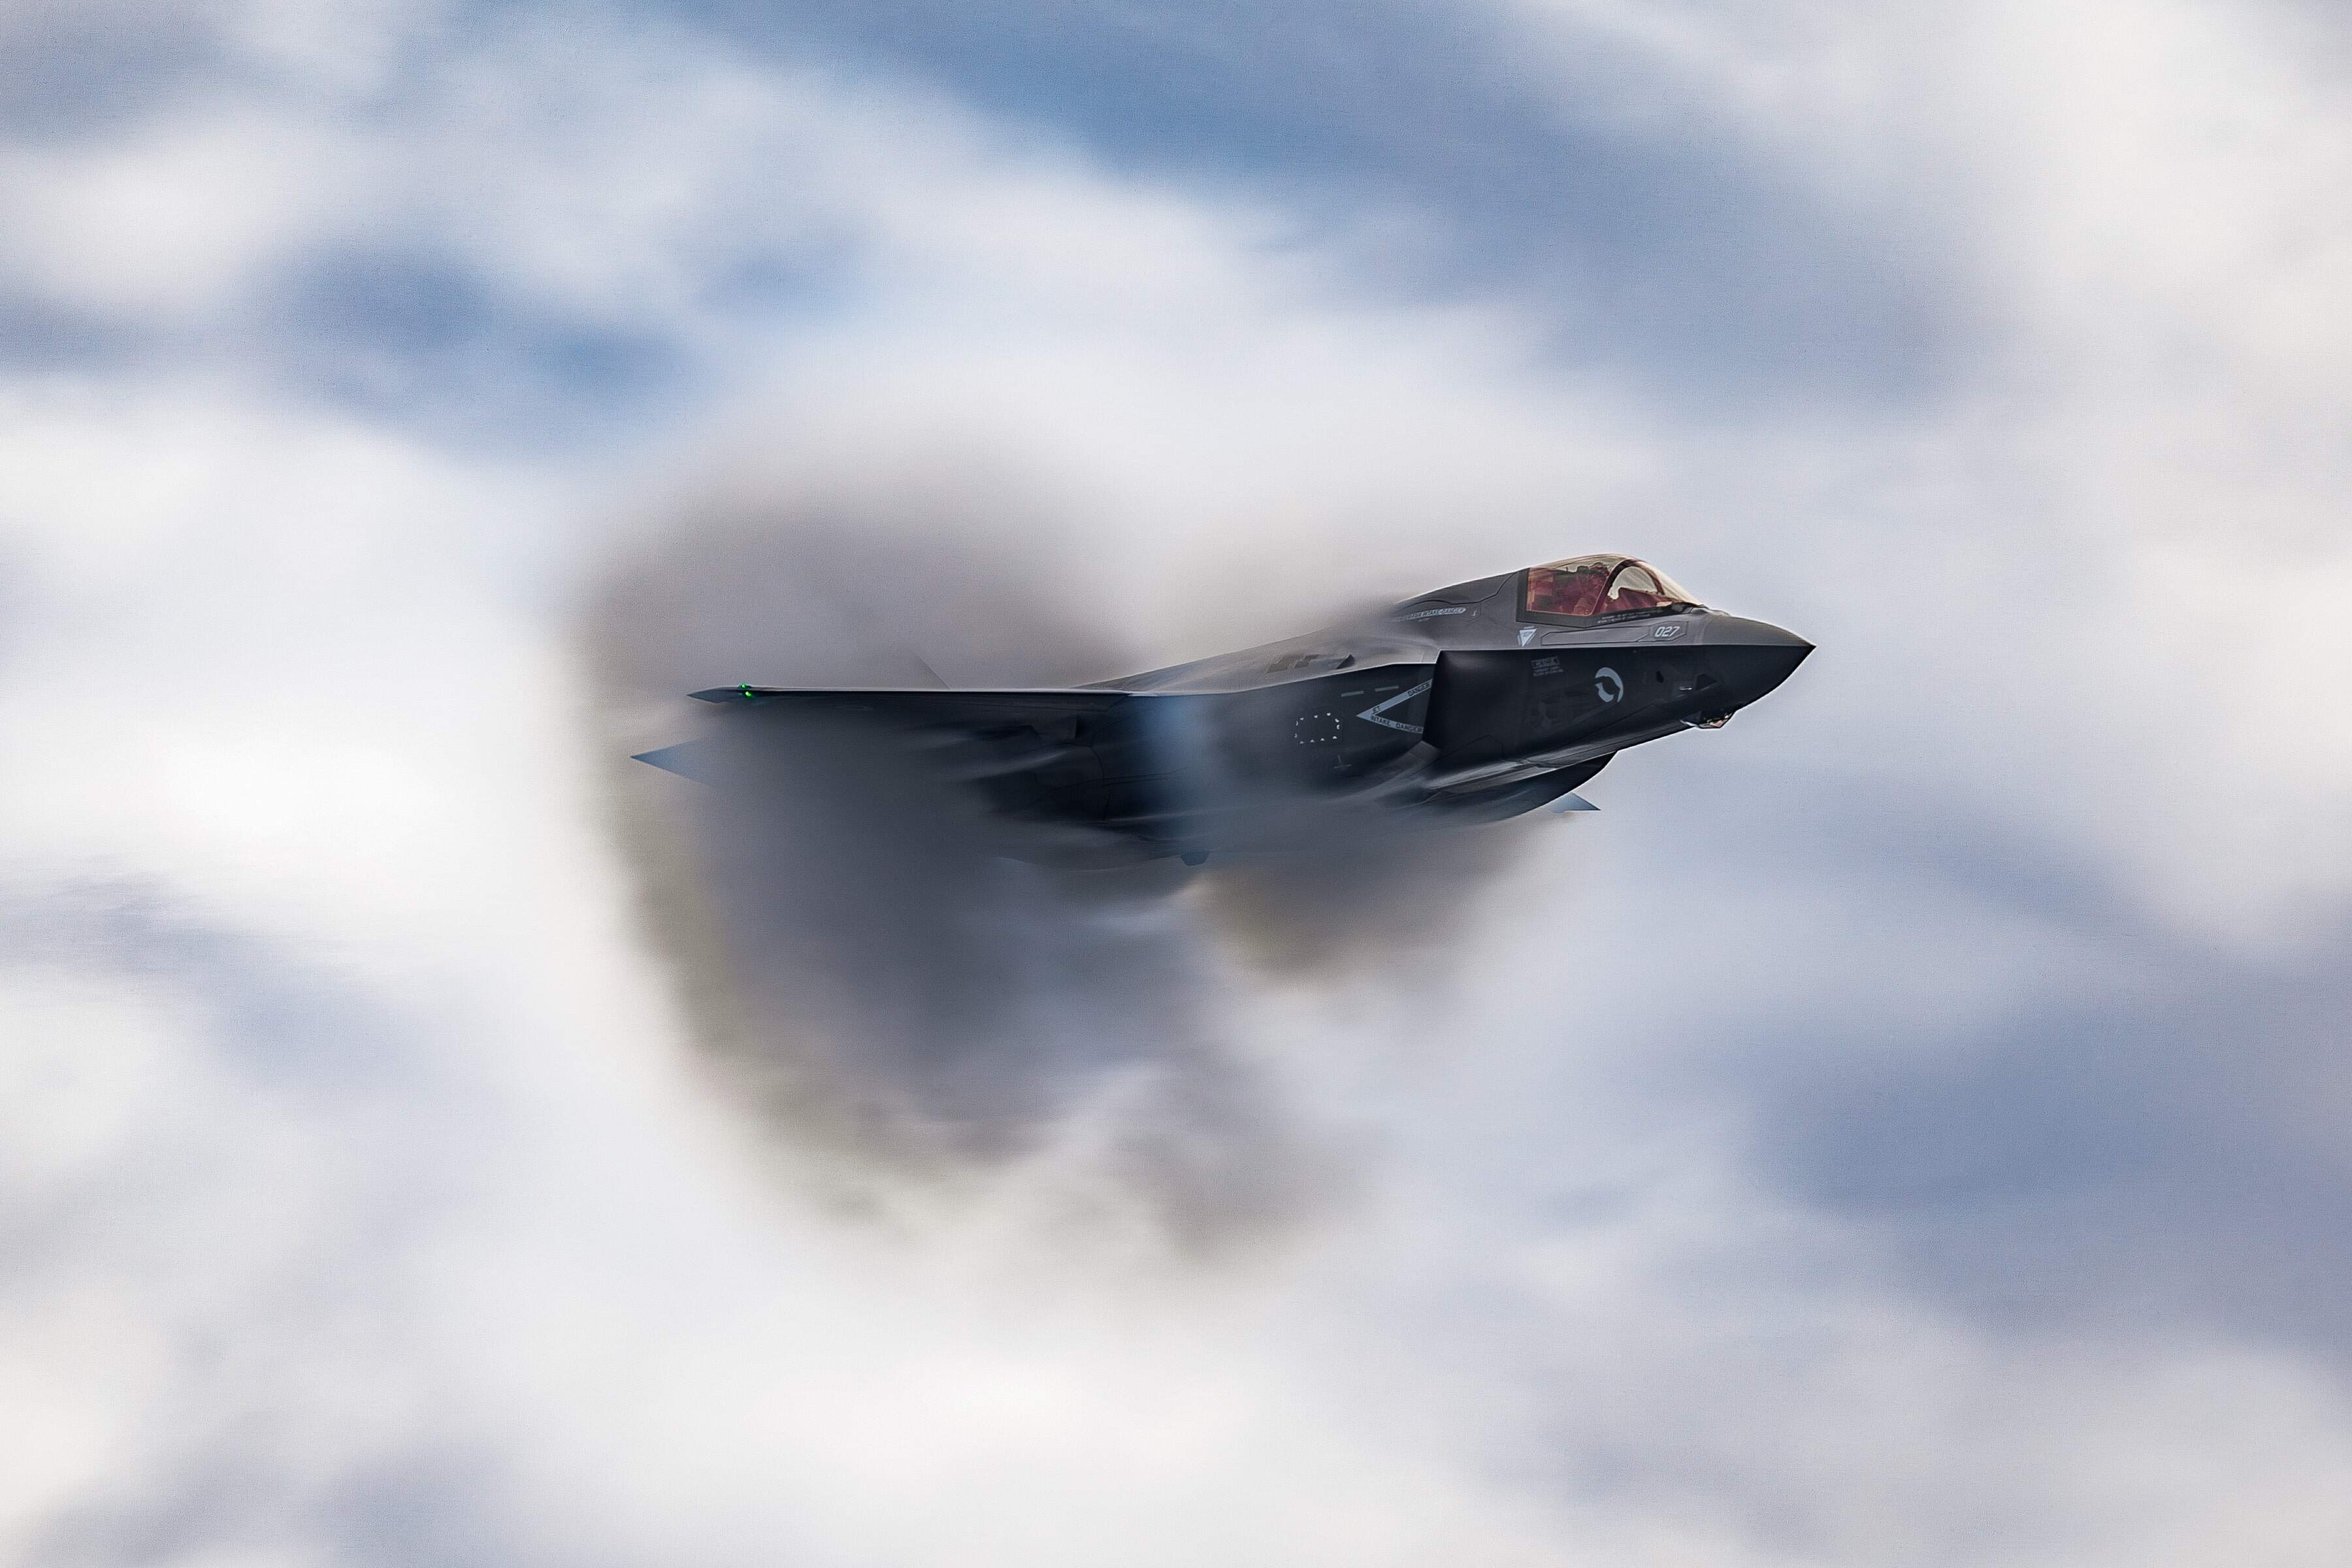 F-35B aircraft flying against a cloudy sky creating a vapor cloud behind it